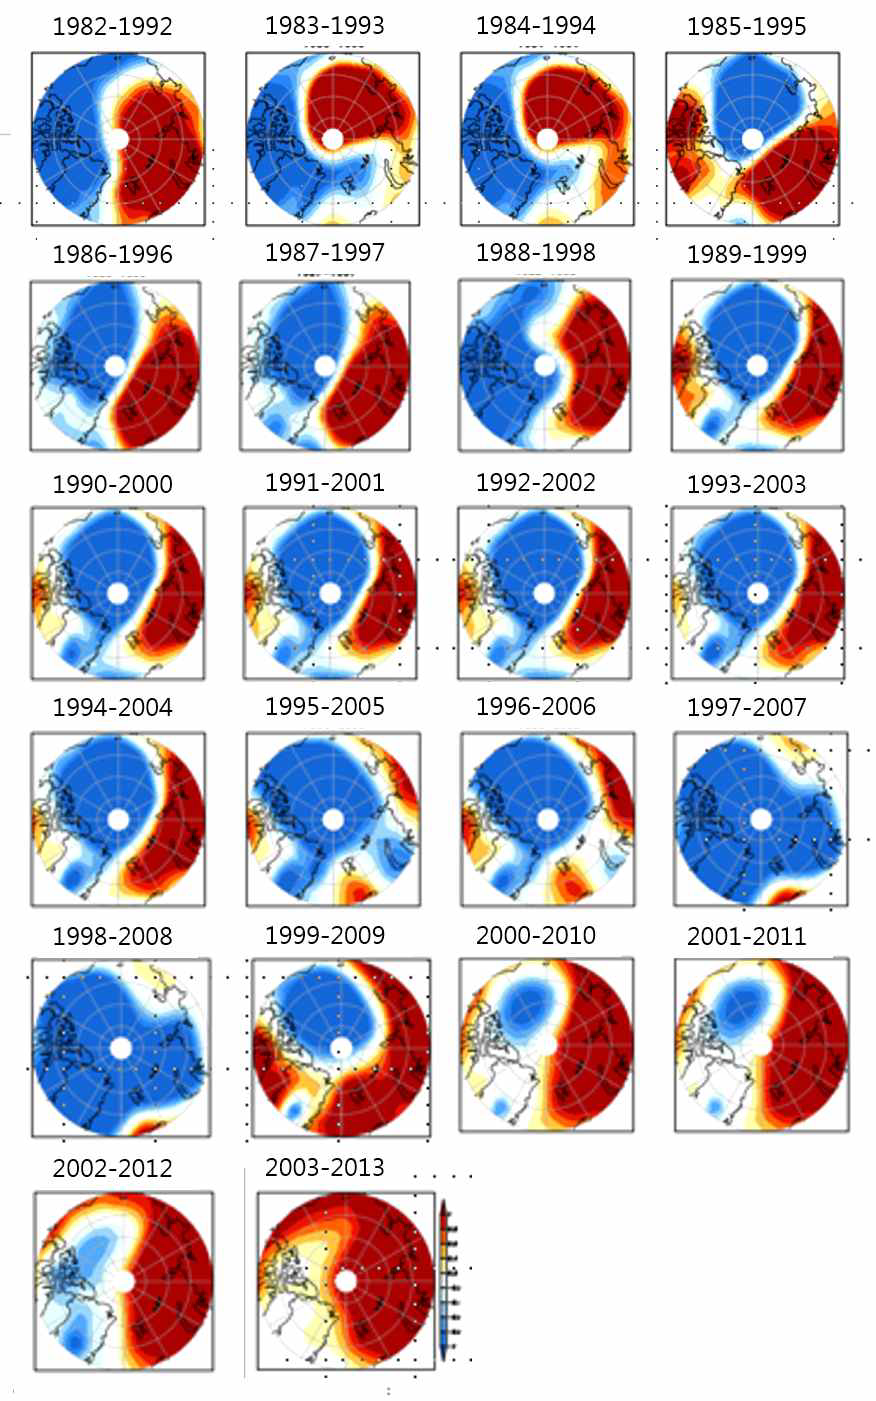 The second mode MSLP 11year window EOF in the North 70°N during summer for the period 1982-2013